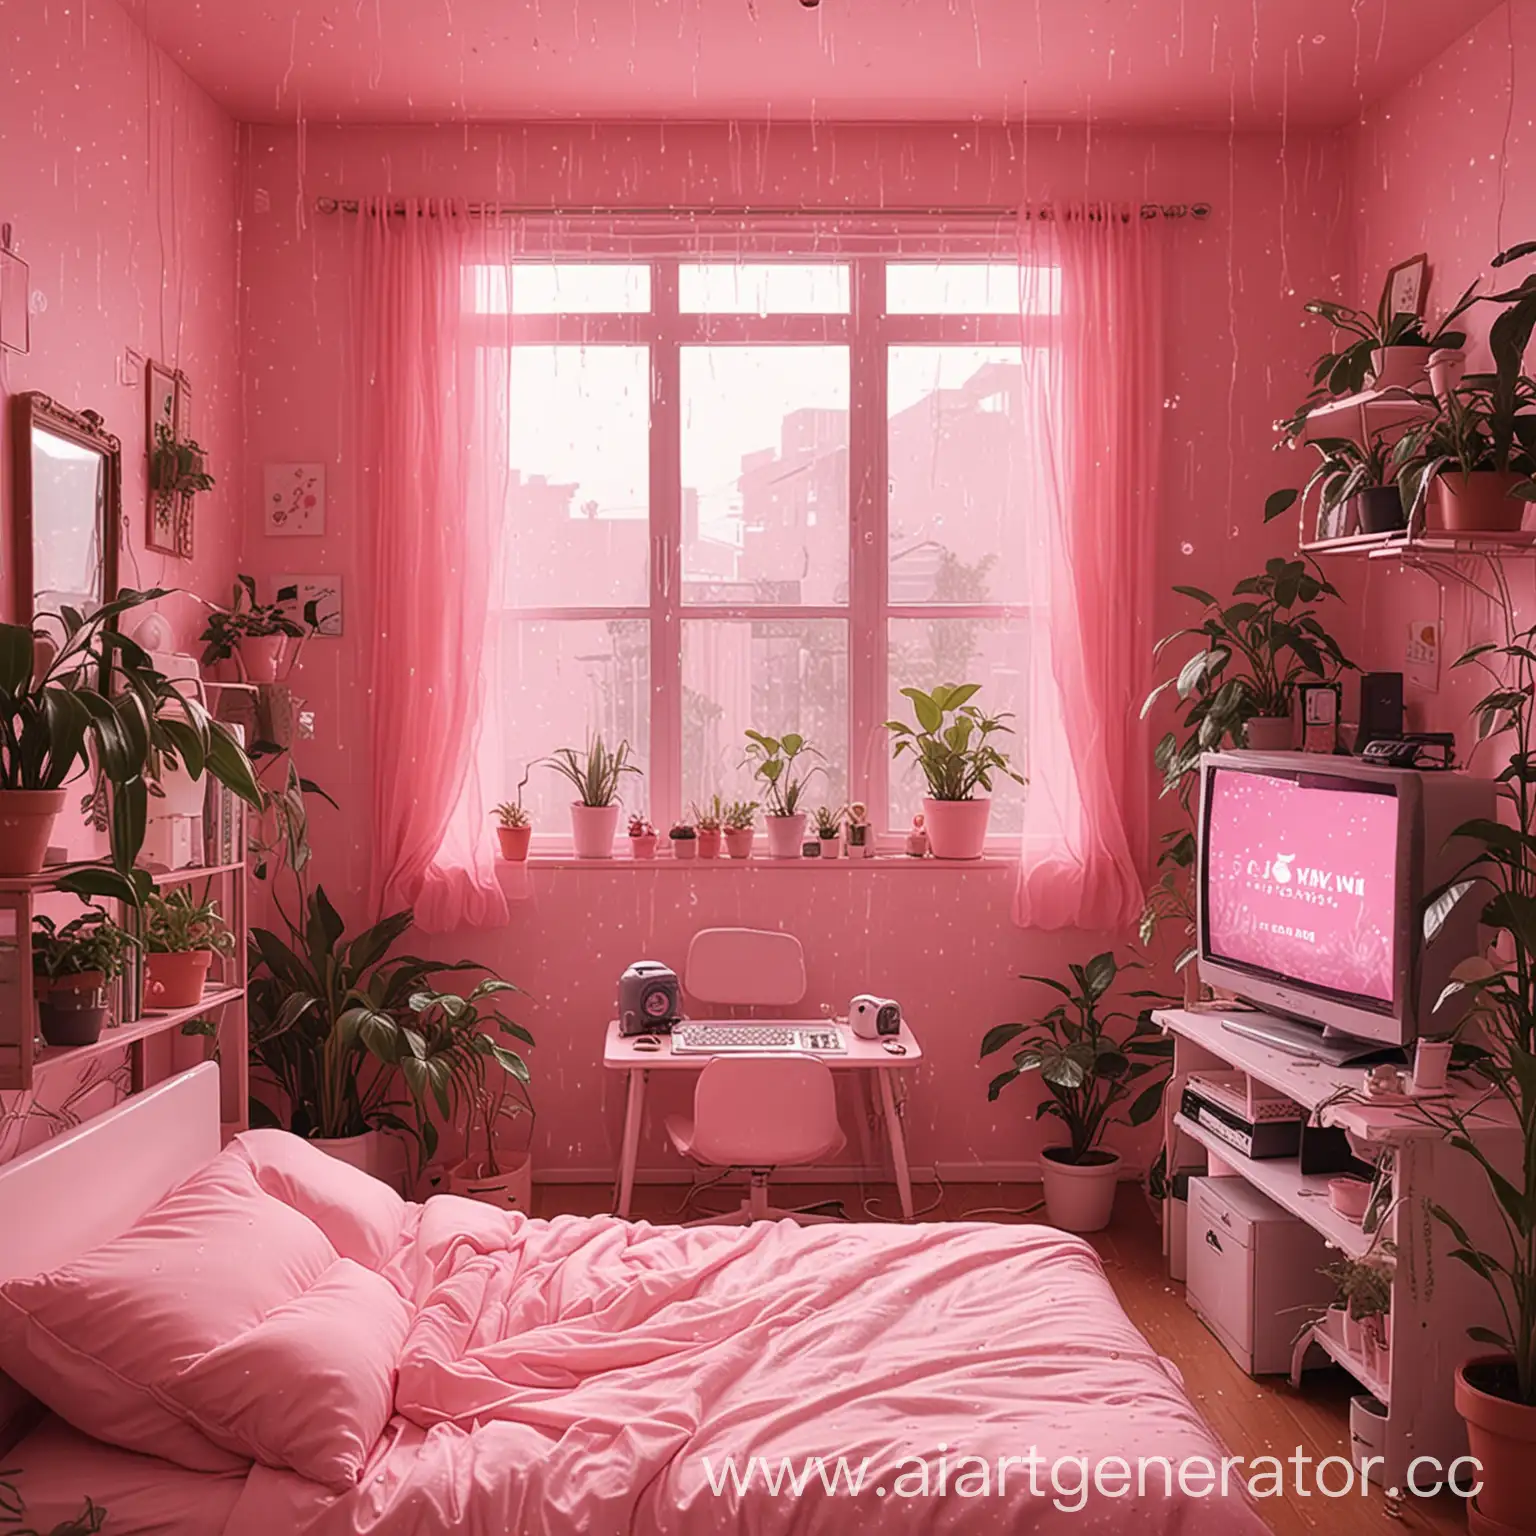 a sweet girlish pink light kawaii gentle room, lots of cute little indoor plants, a pink bed, a  pink streamer chair, a gaming computer, a window behind which it rains, the atmosphere is lamp-like, cozy, lo fi anime style